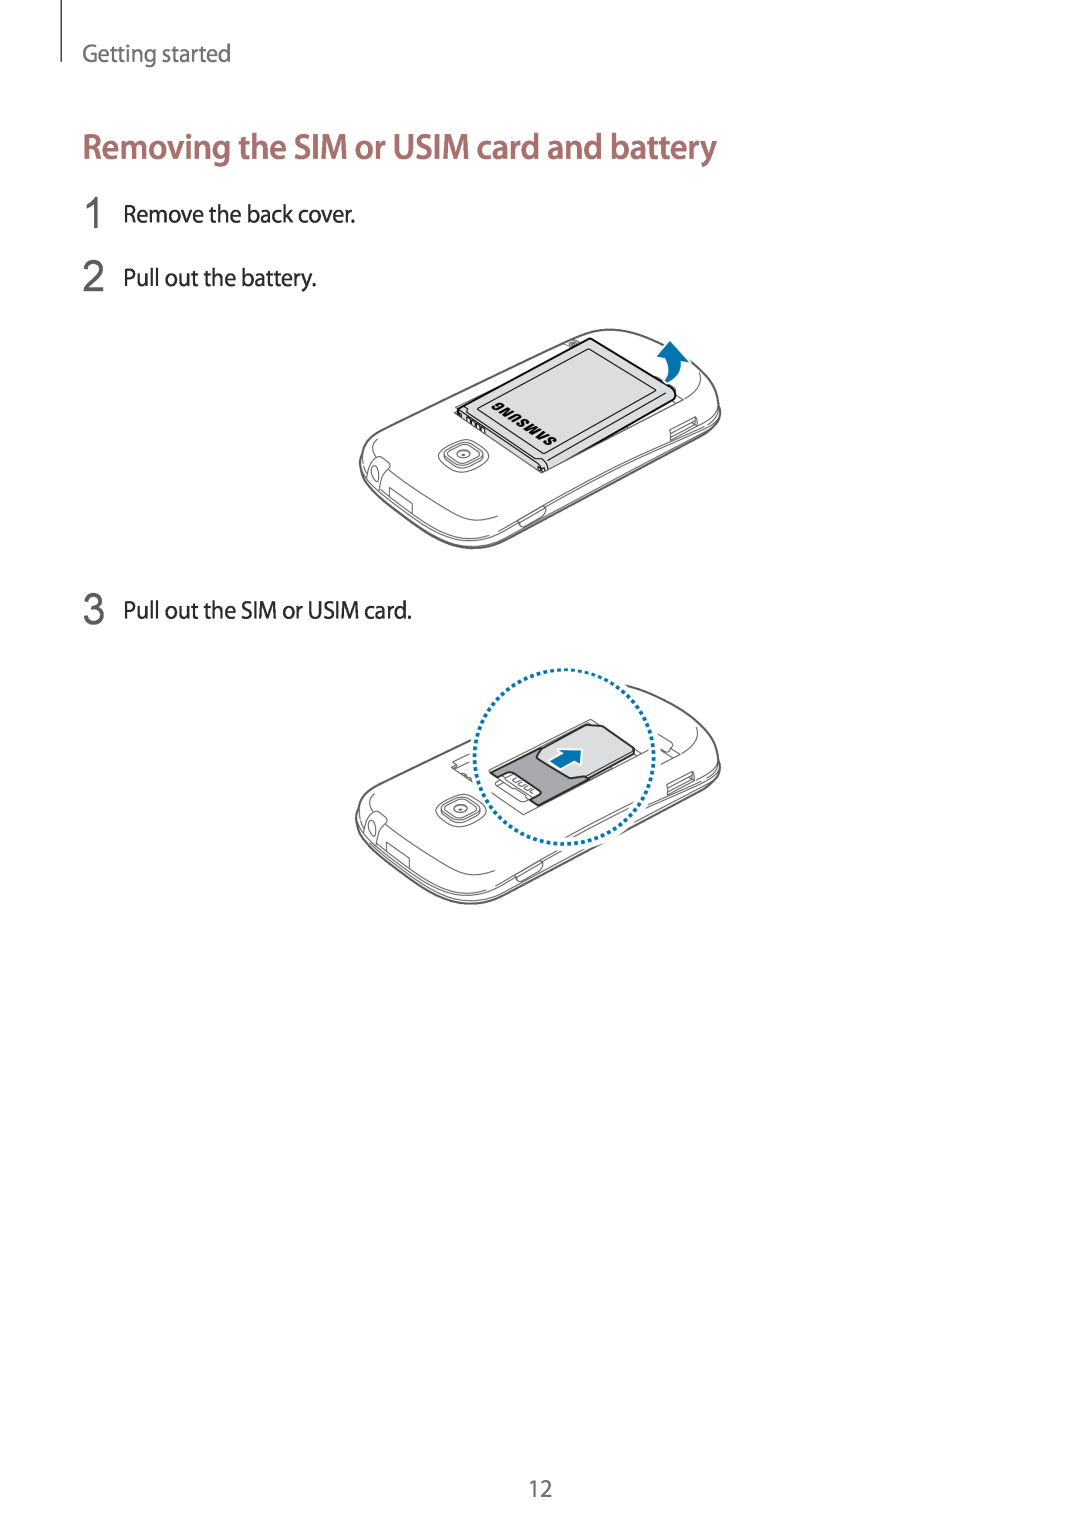 Samsung GT-S6790MKNTIM manual Removing the SIM or USIM card and battery, Getting started, Pull out the SIM or USIM card 